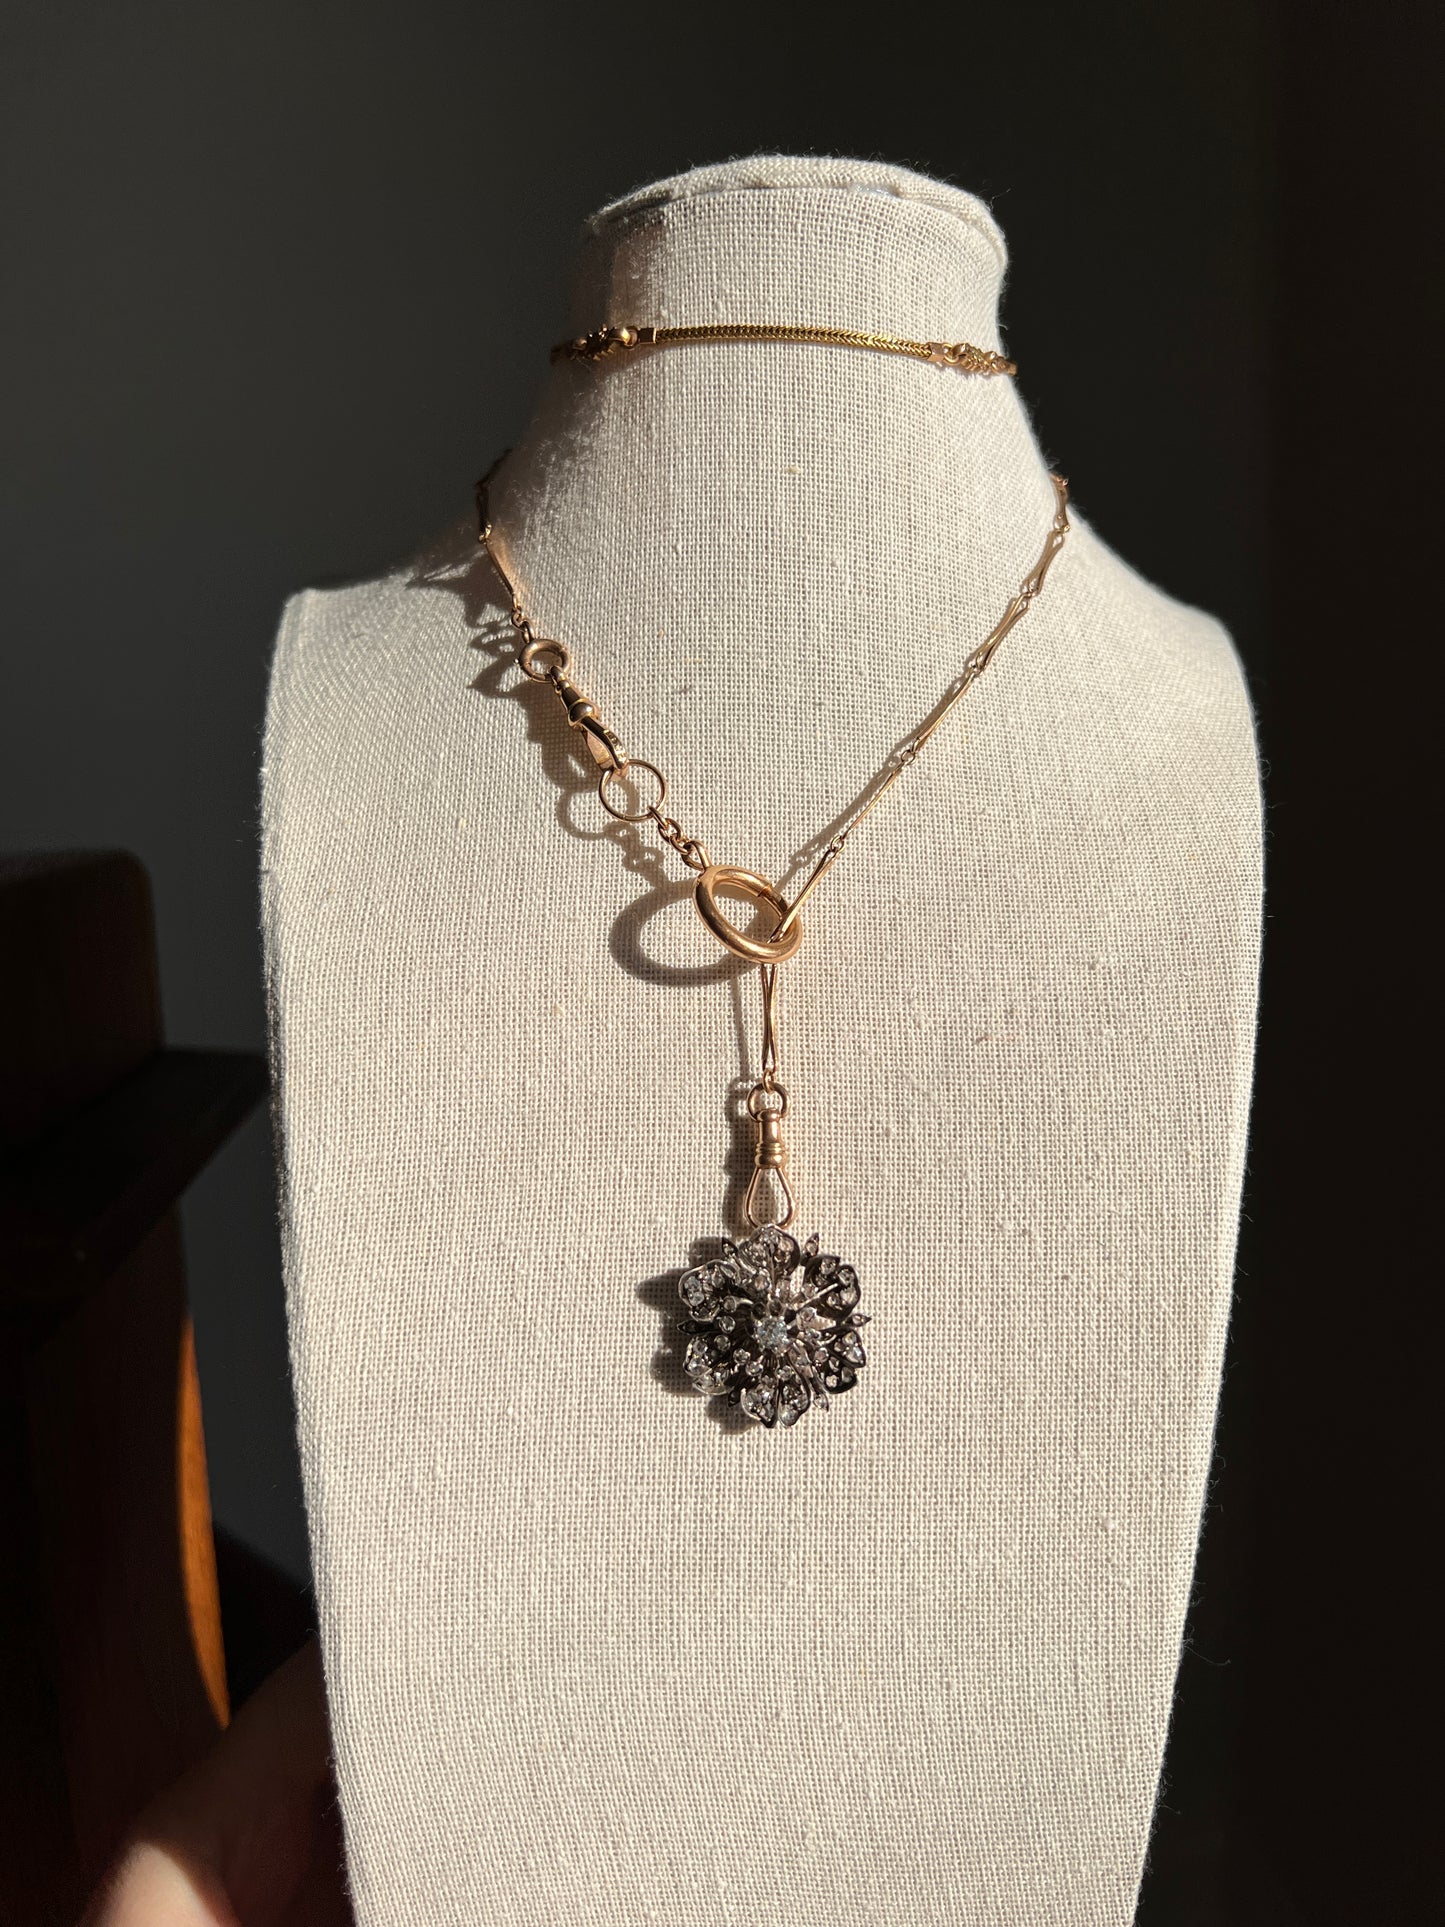 FLORAL Antique Figural 1 + Carat Rose Old Mine Cut DIAMOND Pendant with Hook HOLDER French Victorian 14k Rose Gold Silver